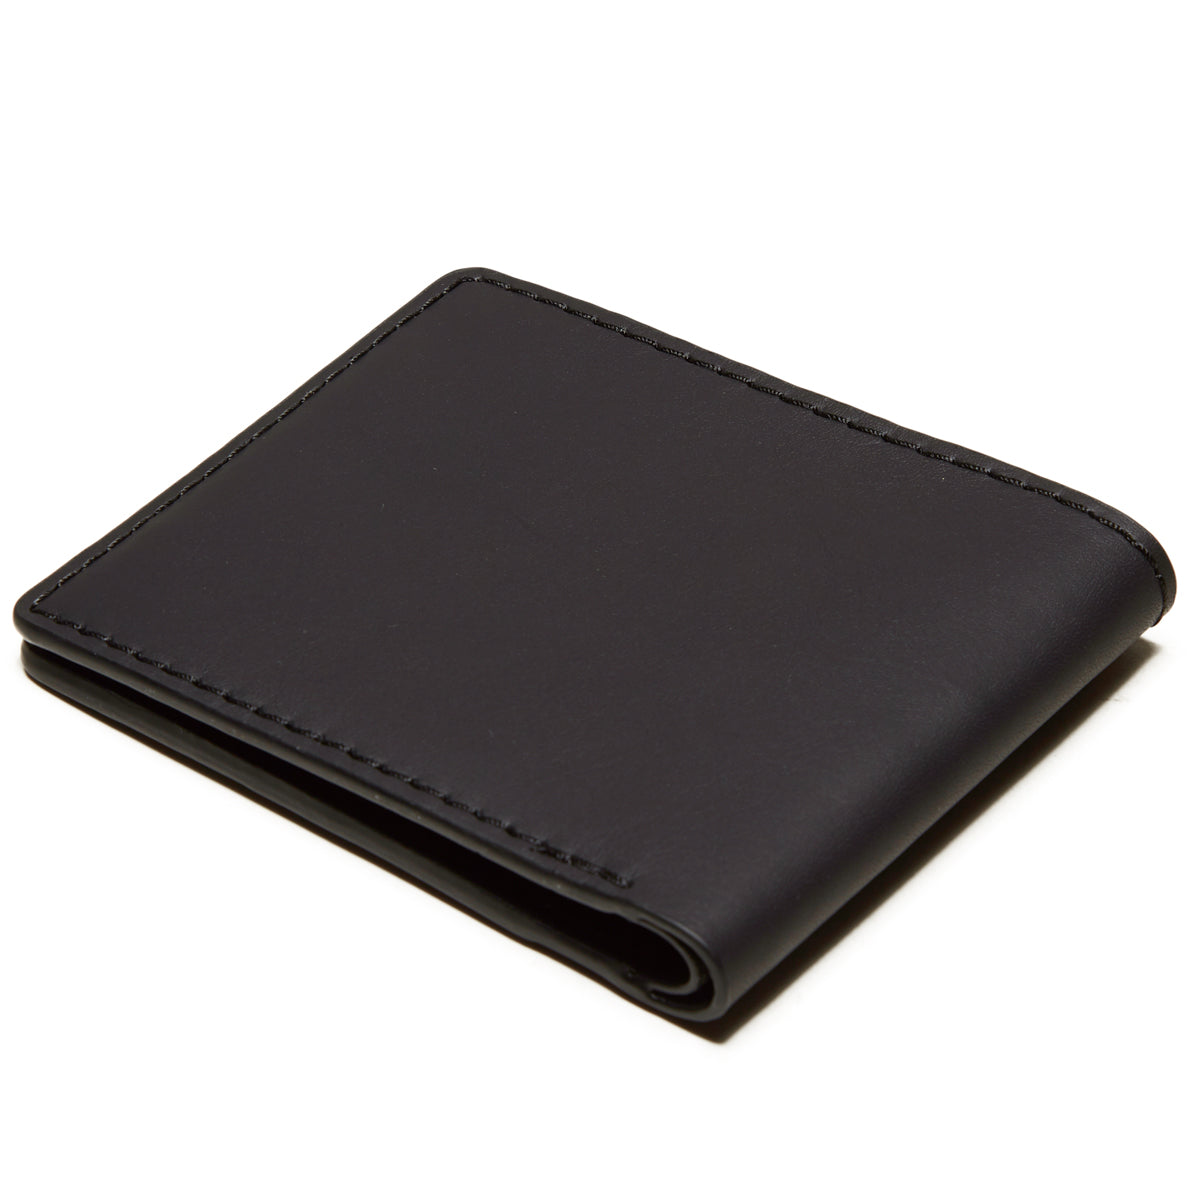 Brixton Traditional Leather Wallet - Black image 3